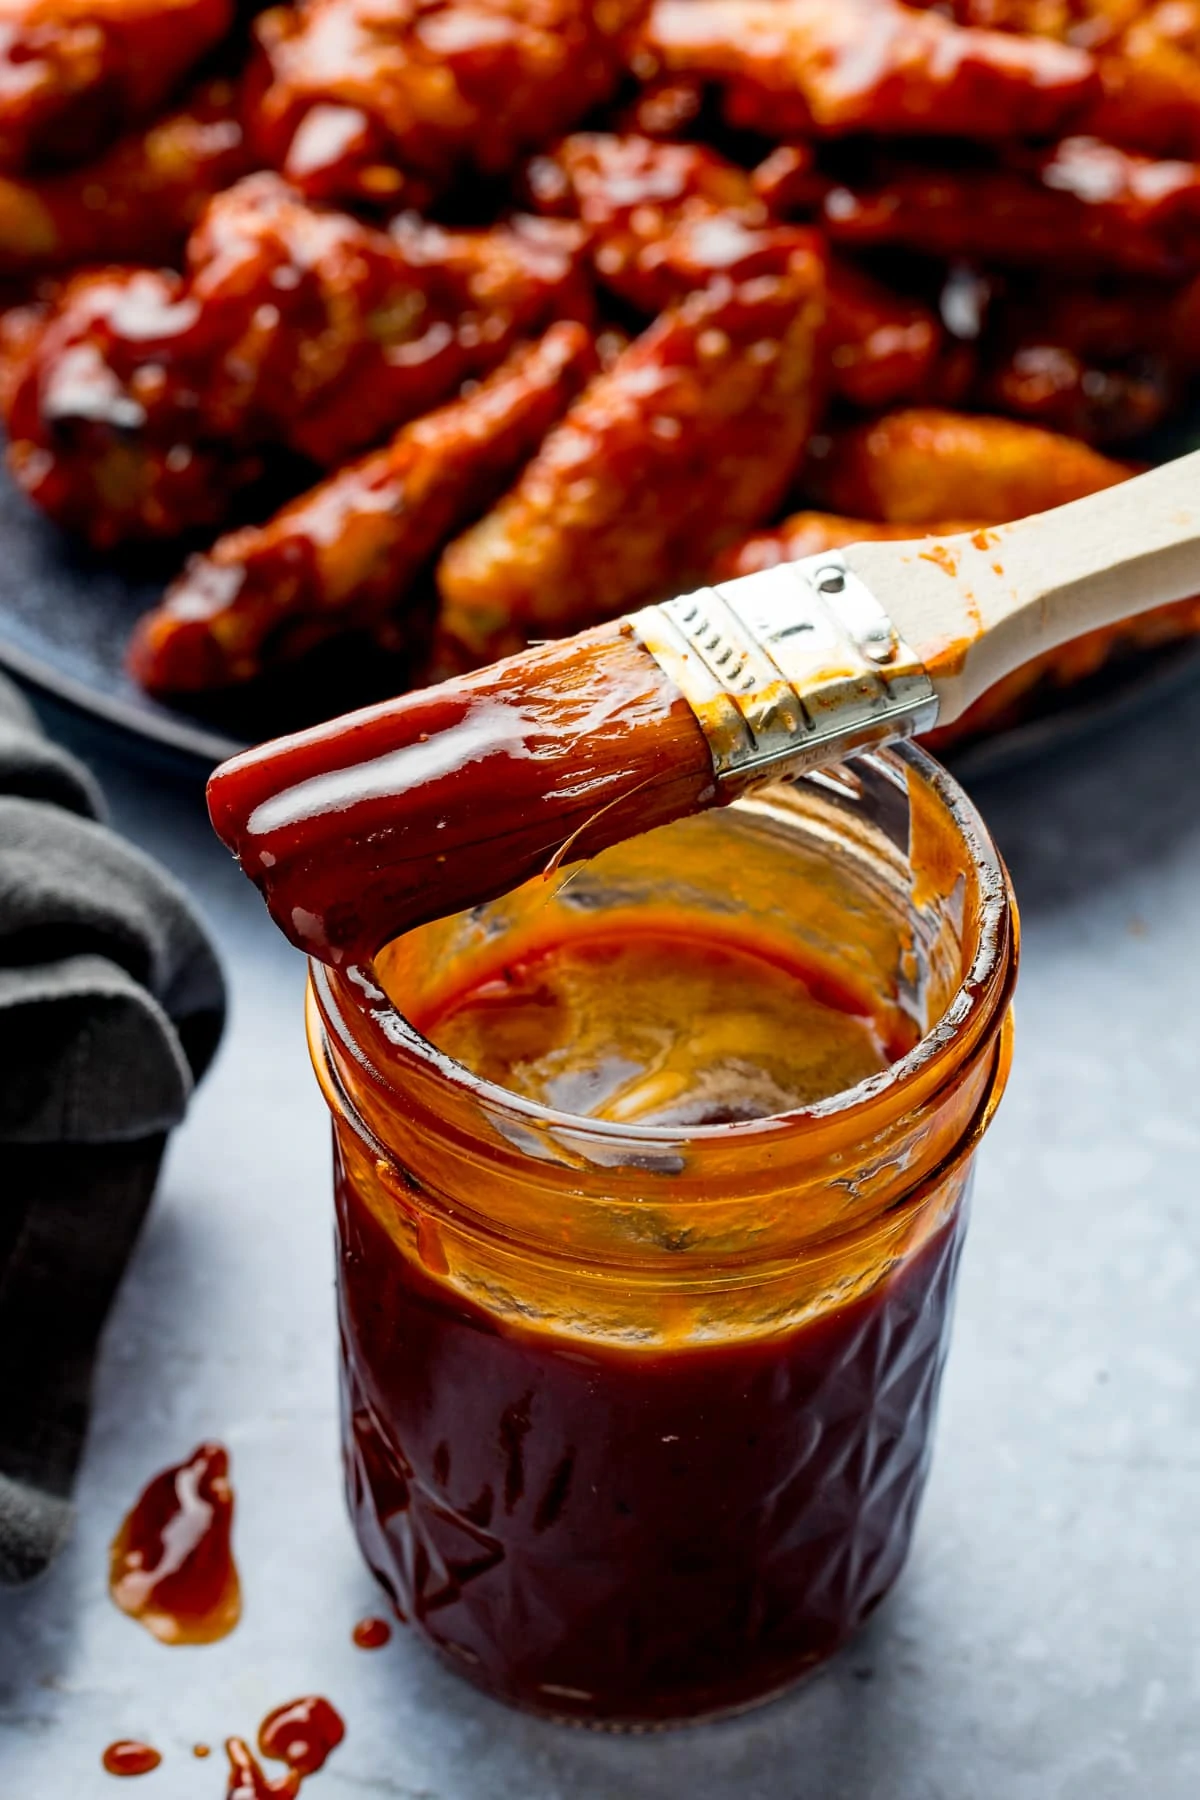 Jar of homemade bbq sauce with a basting brush on top, chicken wings in the background